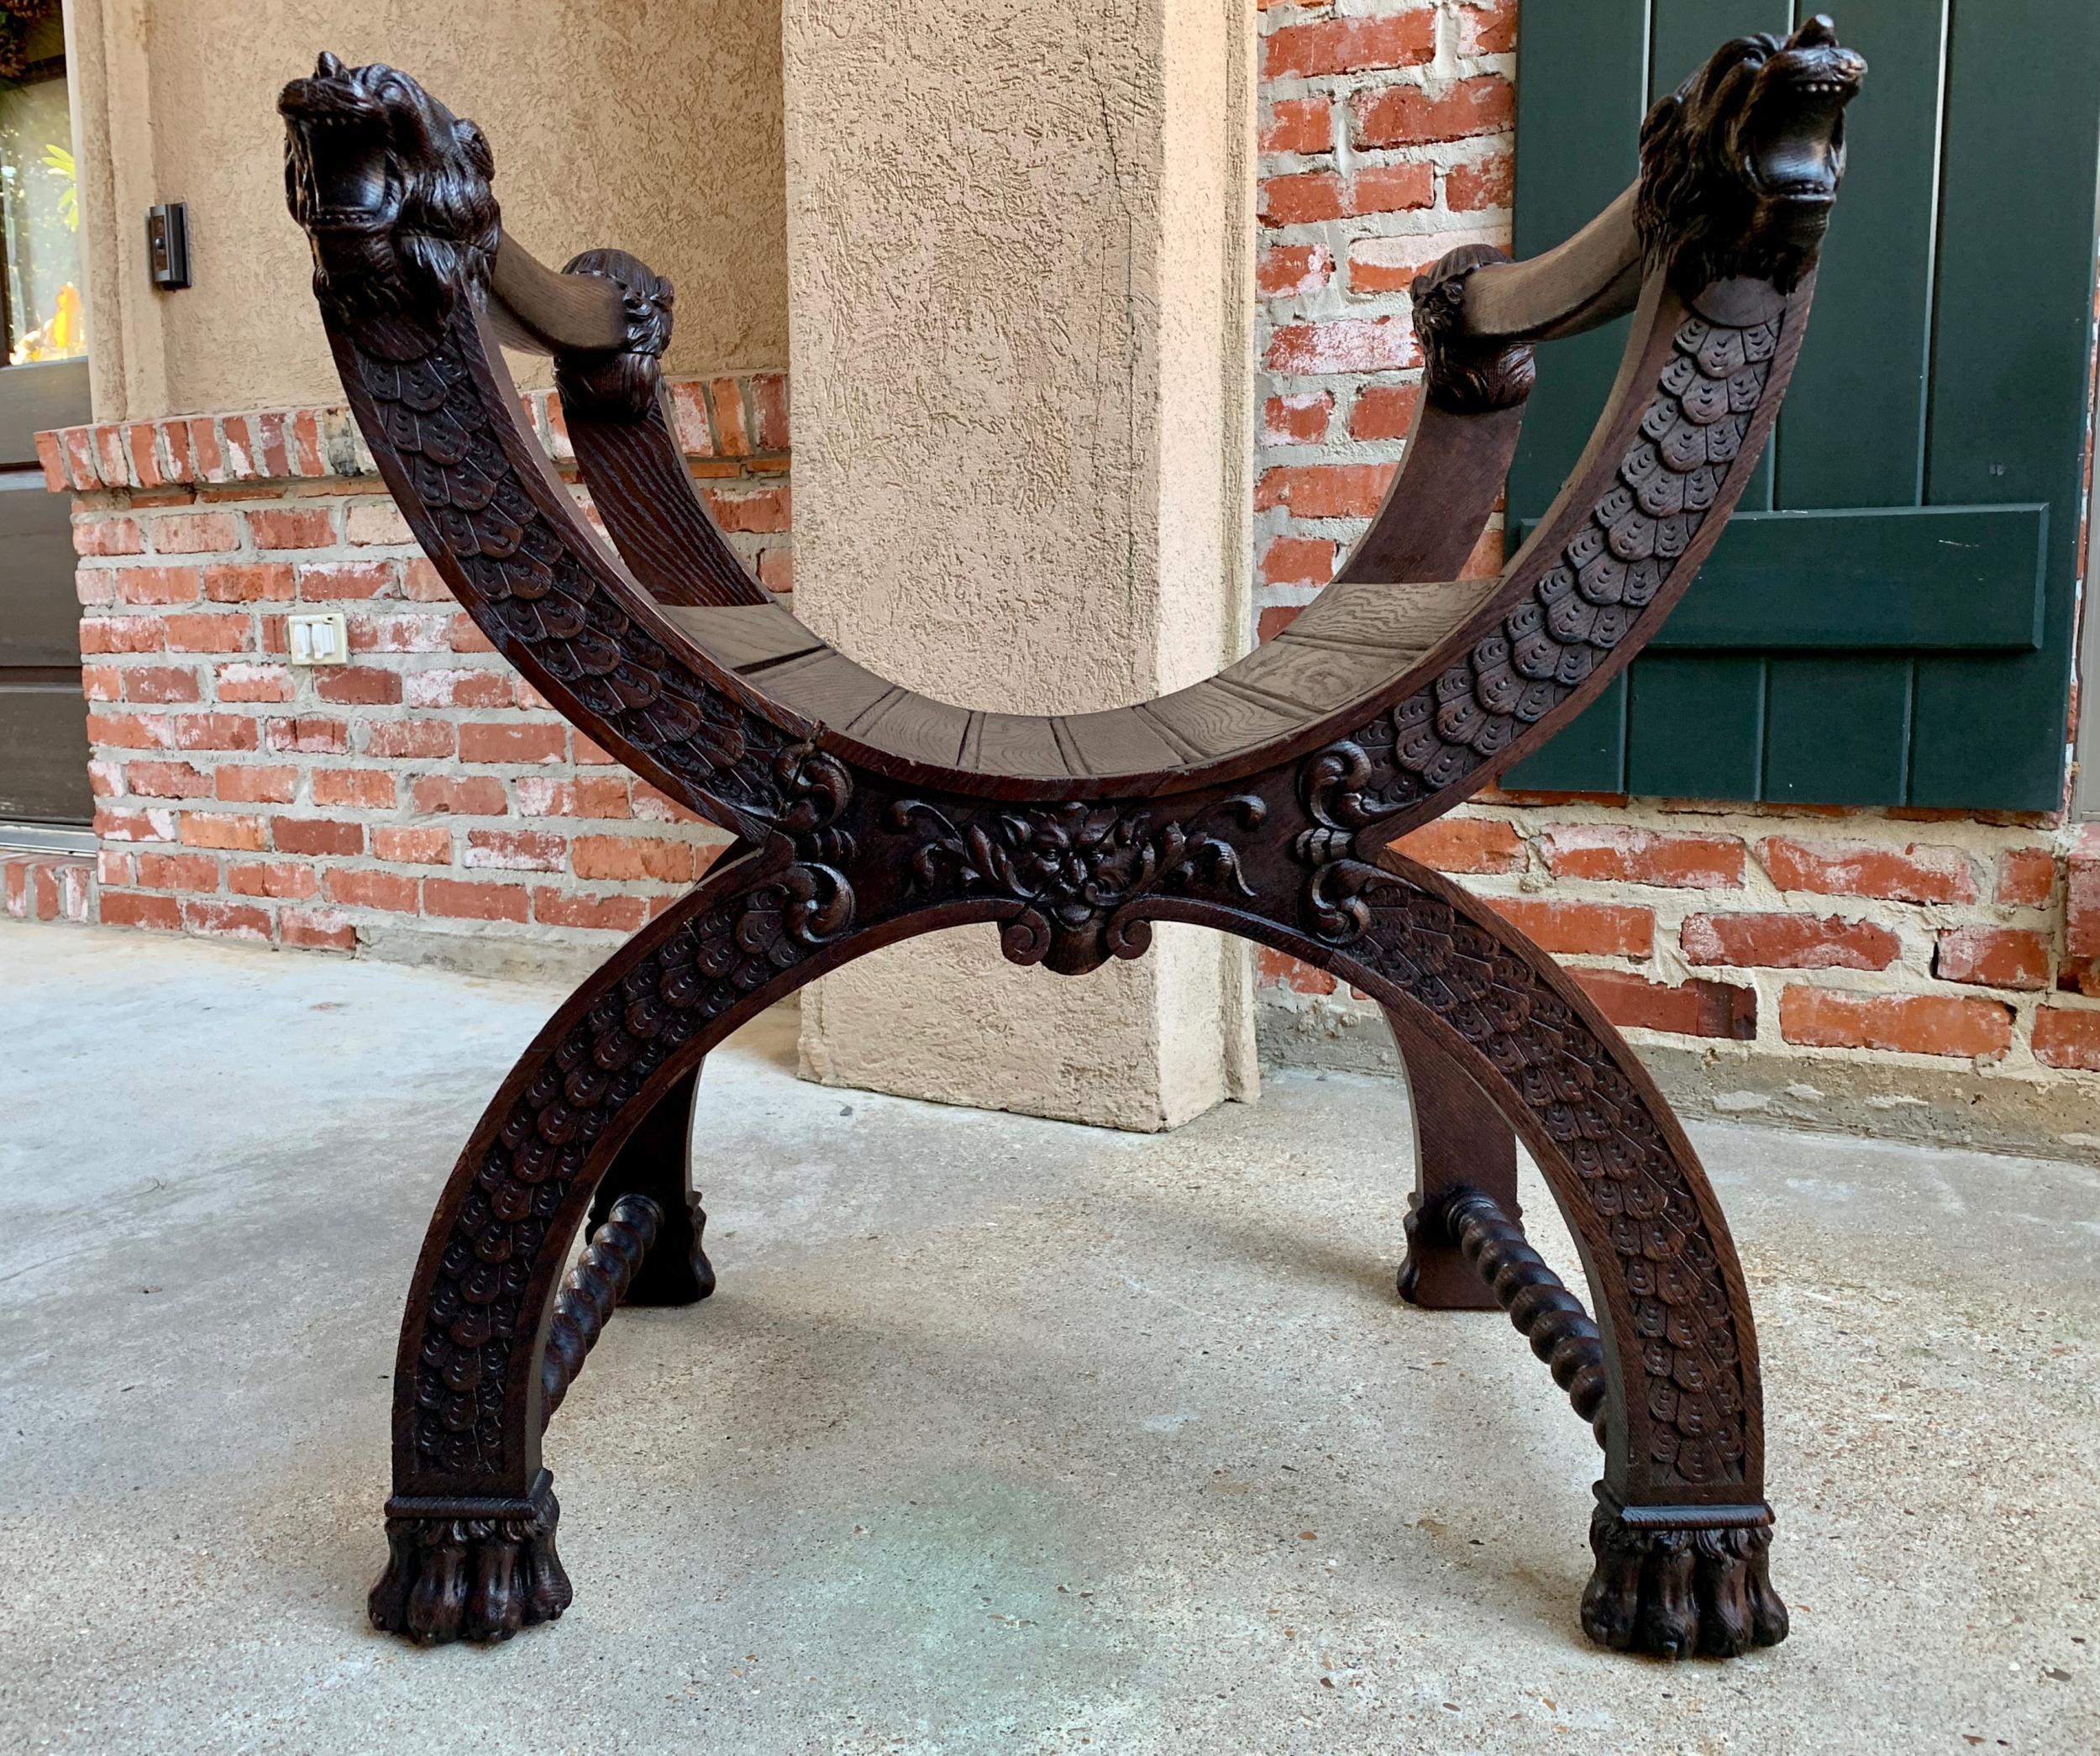 Antique French carved oak curule bench chair renaissance dagobert barley twist

~Direct from France~
~Lovely antique carved oak curule bench with beautifully detailed hand carvings from top to bottom.~
~Sweeping arms extend to four fabulous